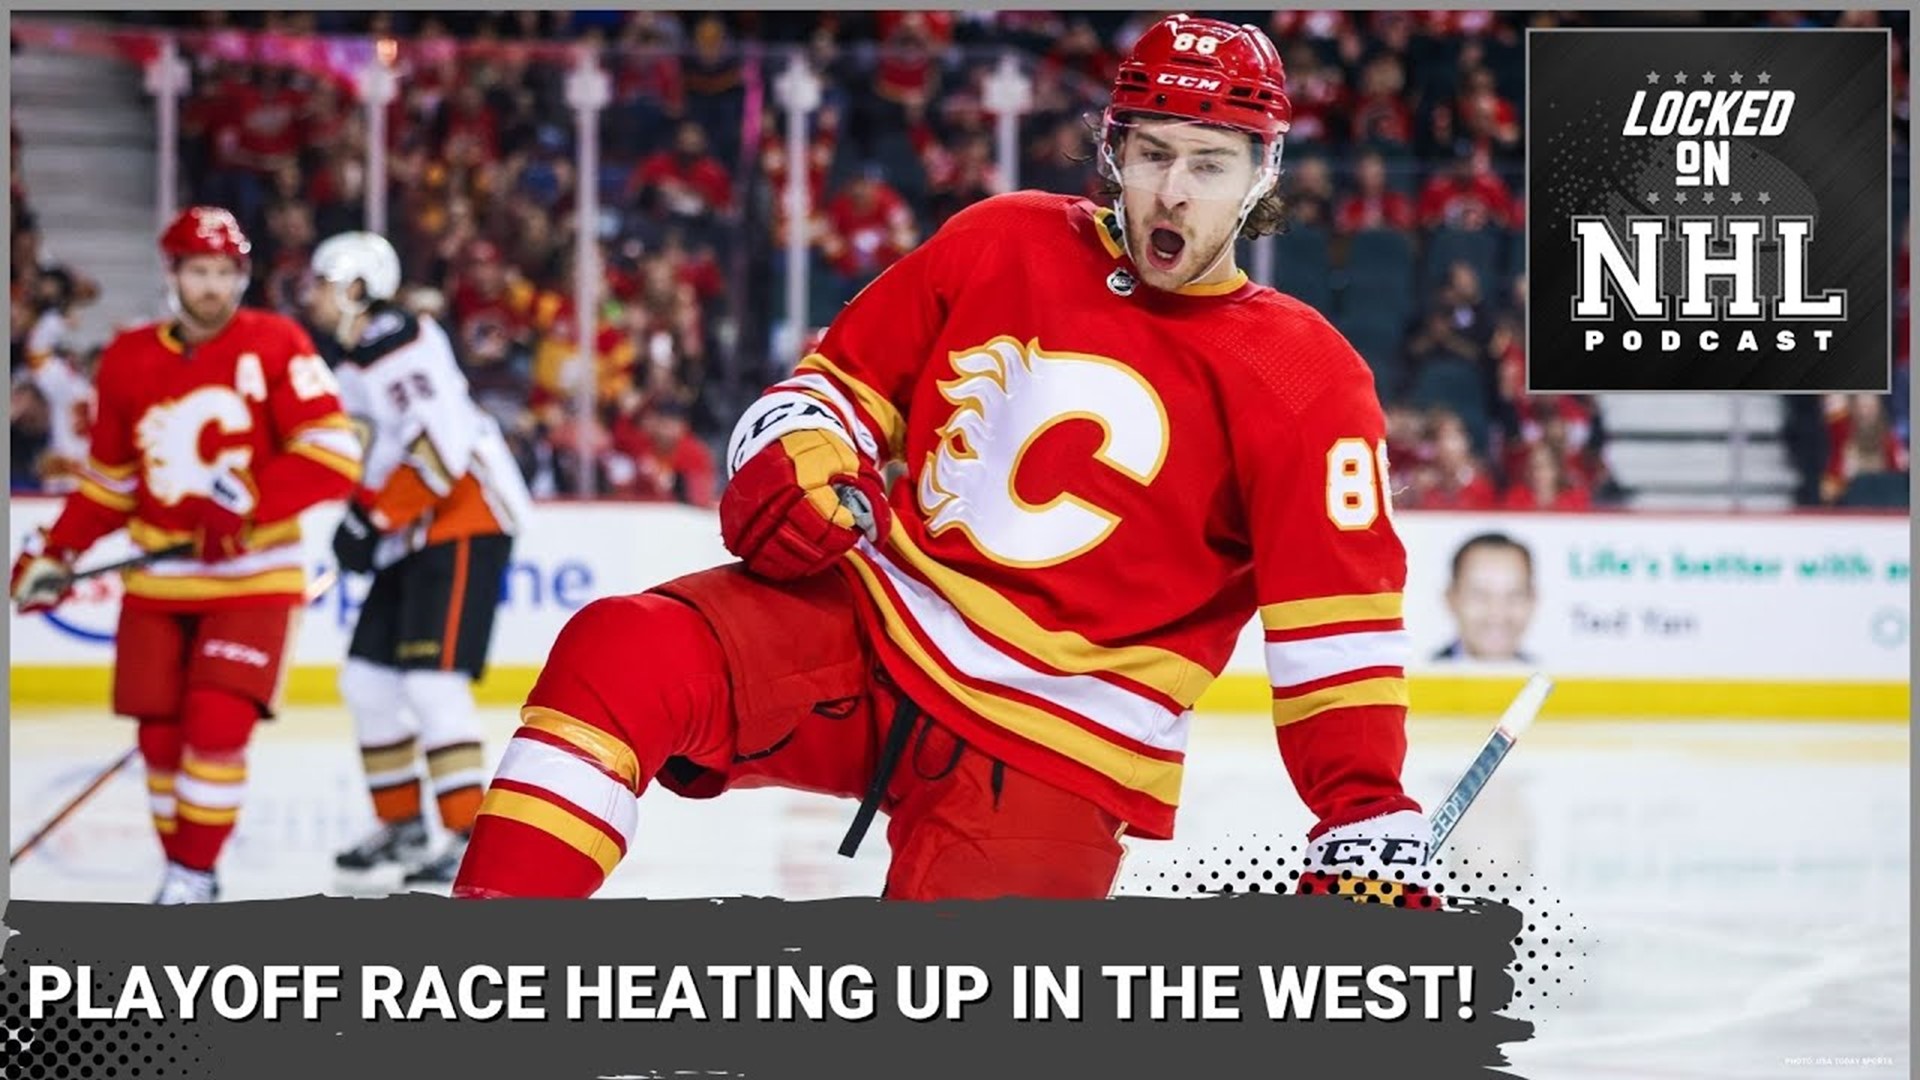 Western Conference Playoff Race is heating up!